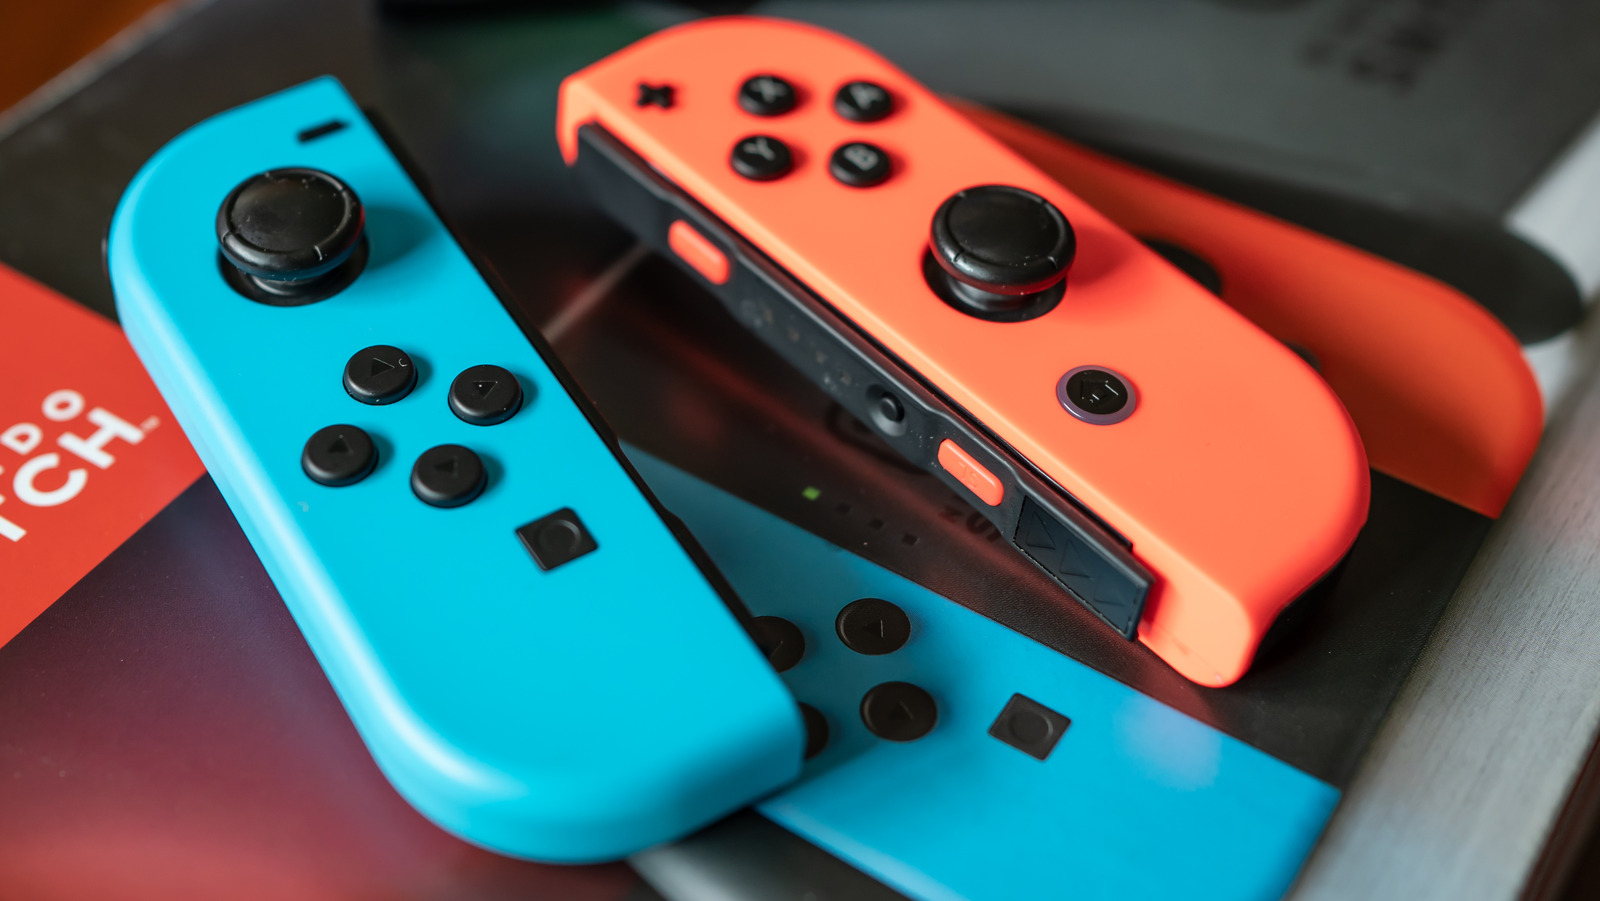 How To Use Your Nintendo Joy-Cons On An iPhone